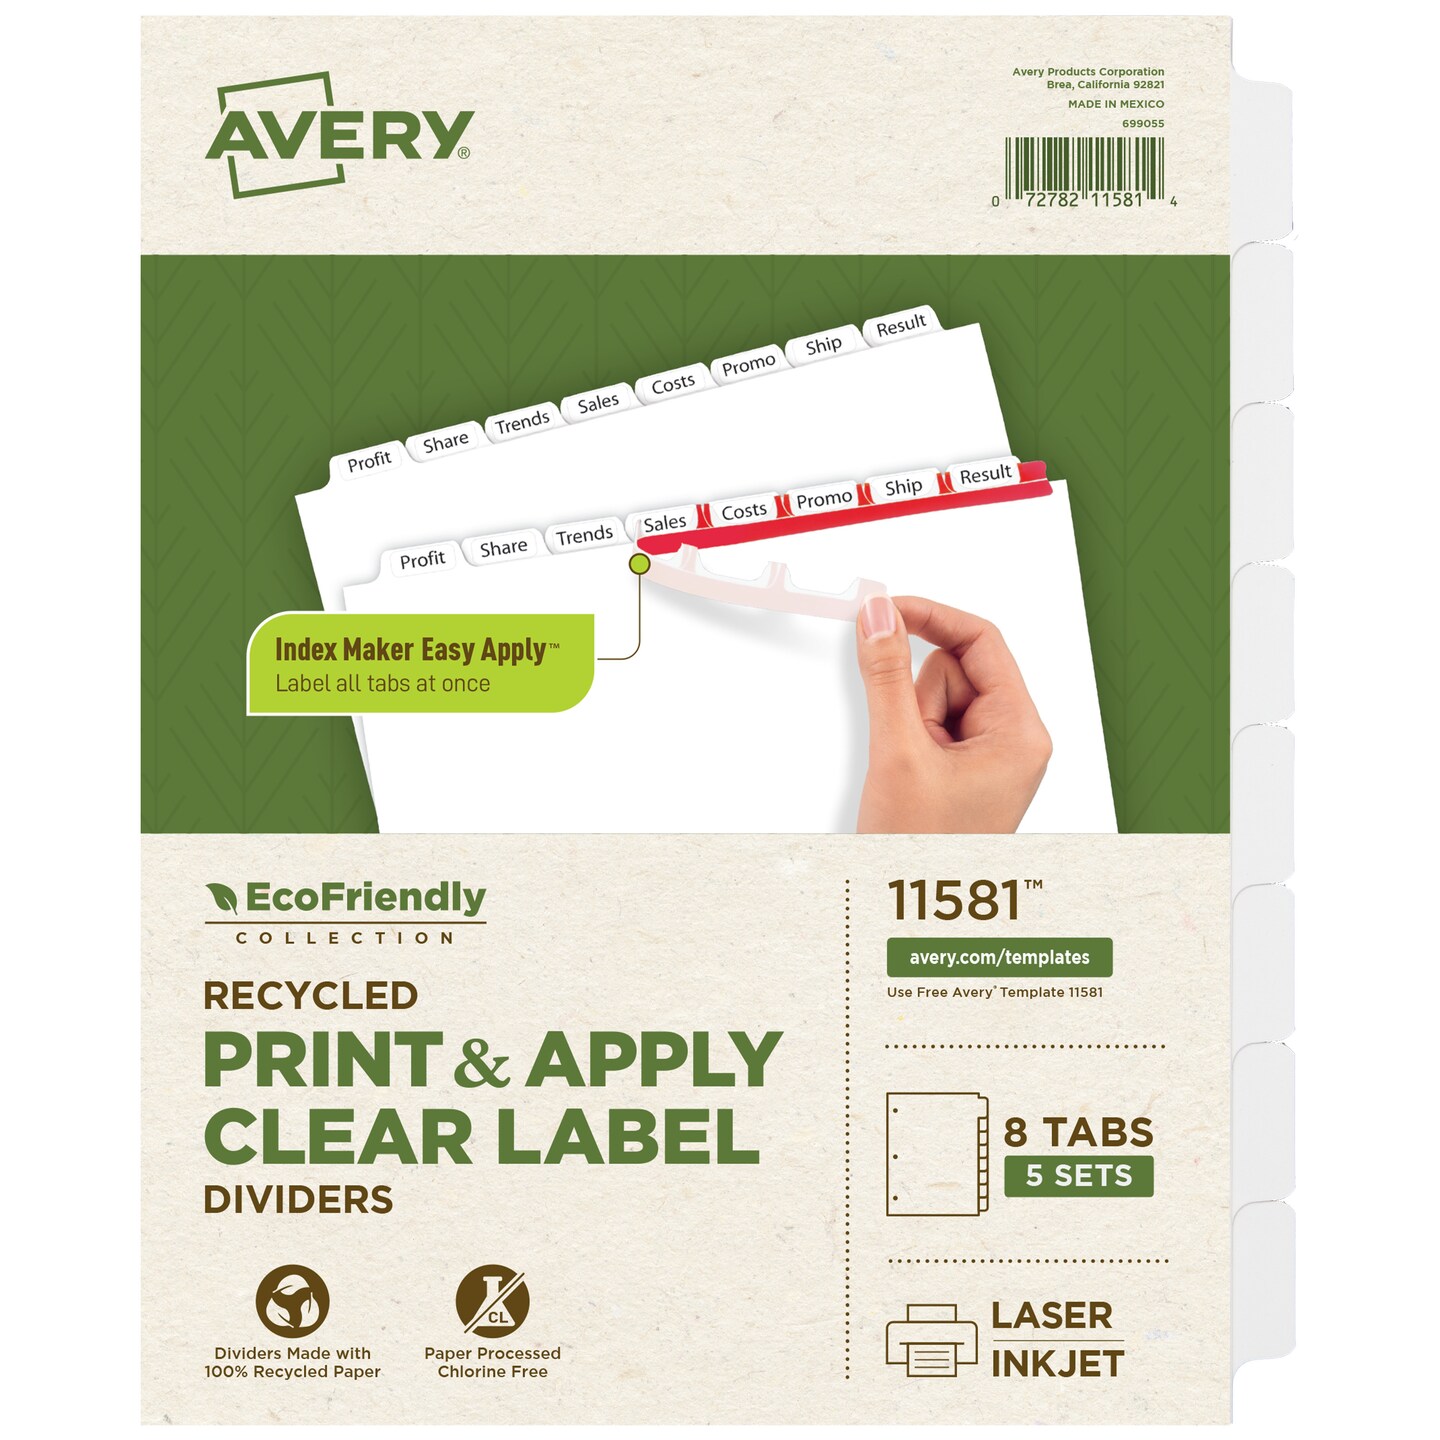 Avery EcoFriendly Recycled Dividers for 3 Ring Binders, 8-Tab, White Tabs, Index Maker Print and Apply Clear Label Strip, 5 Sets for 40 Binder Dividers Total (11581)